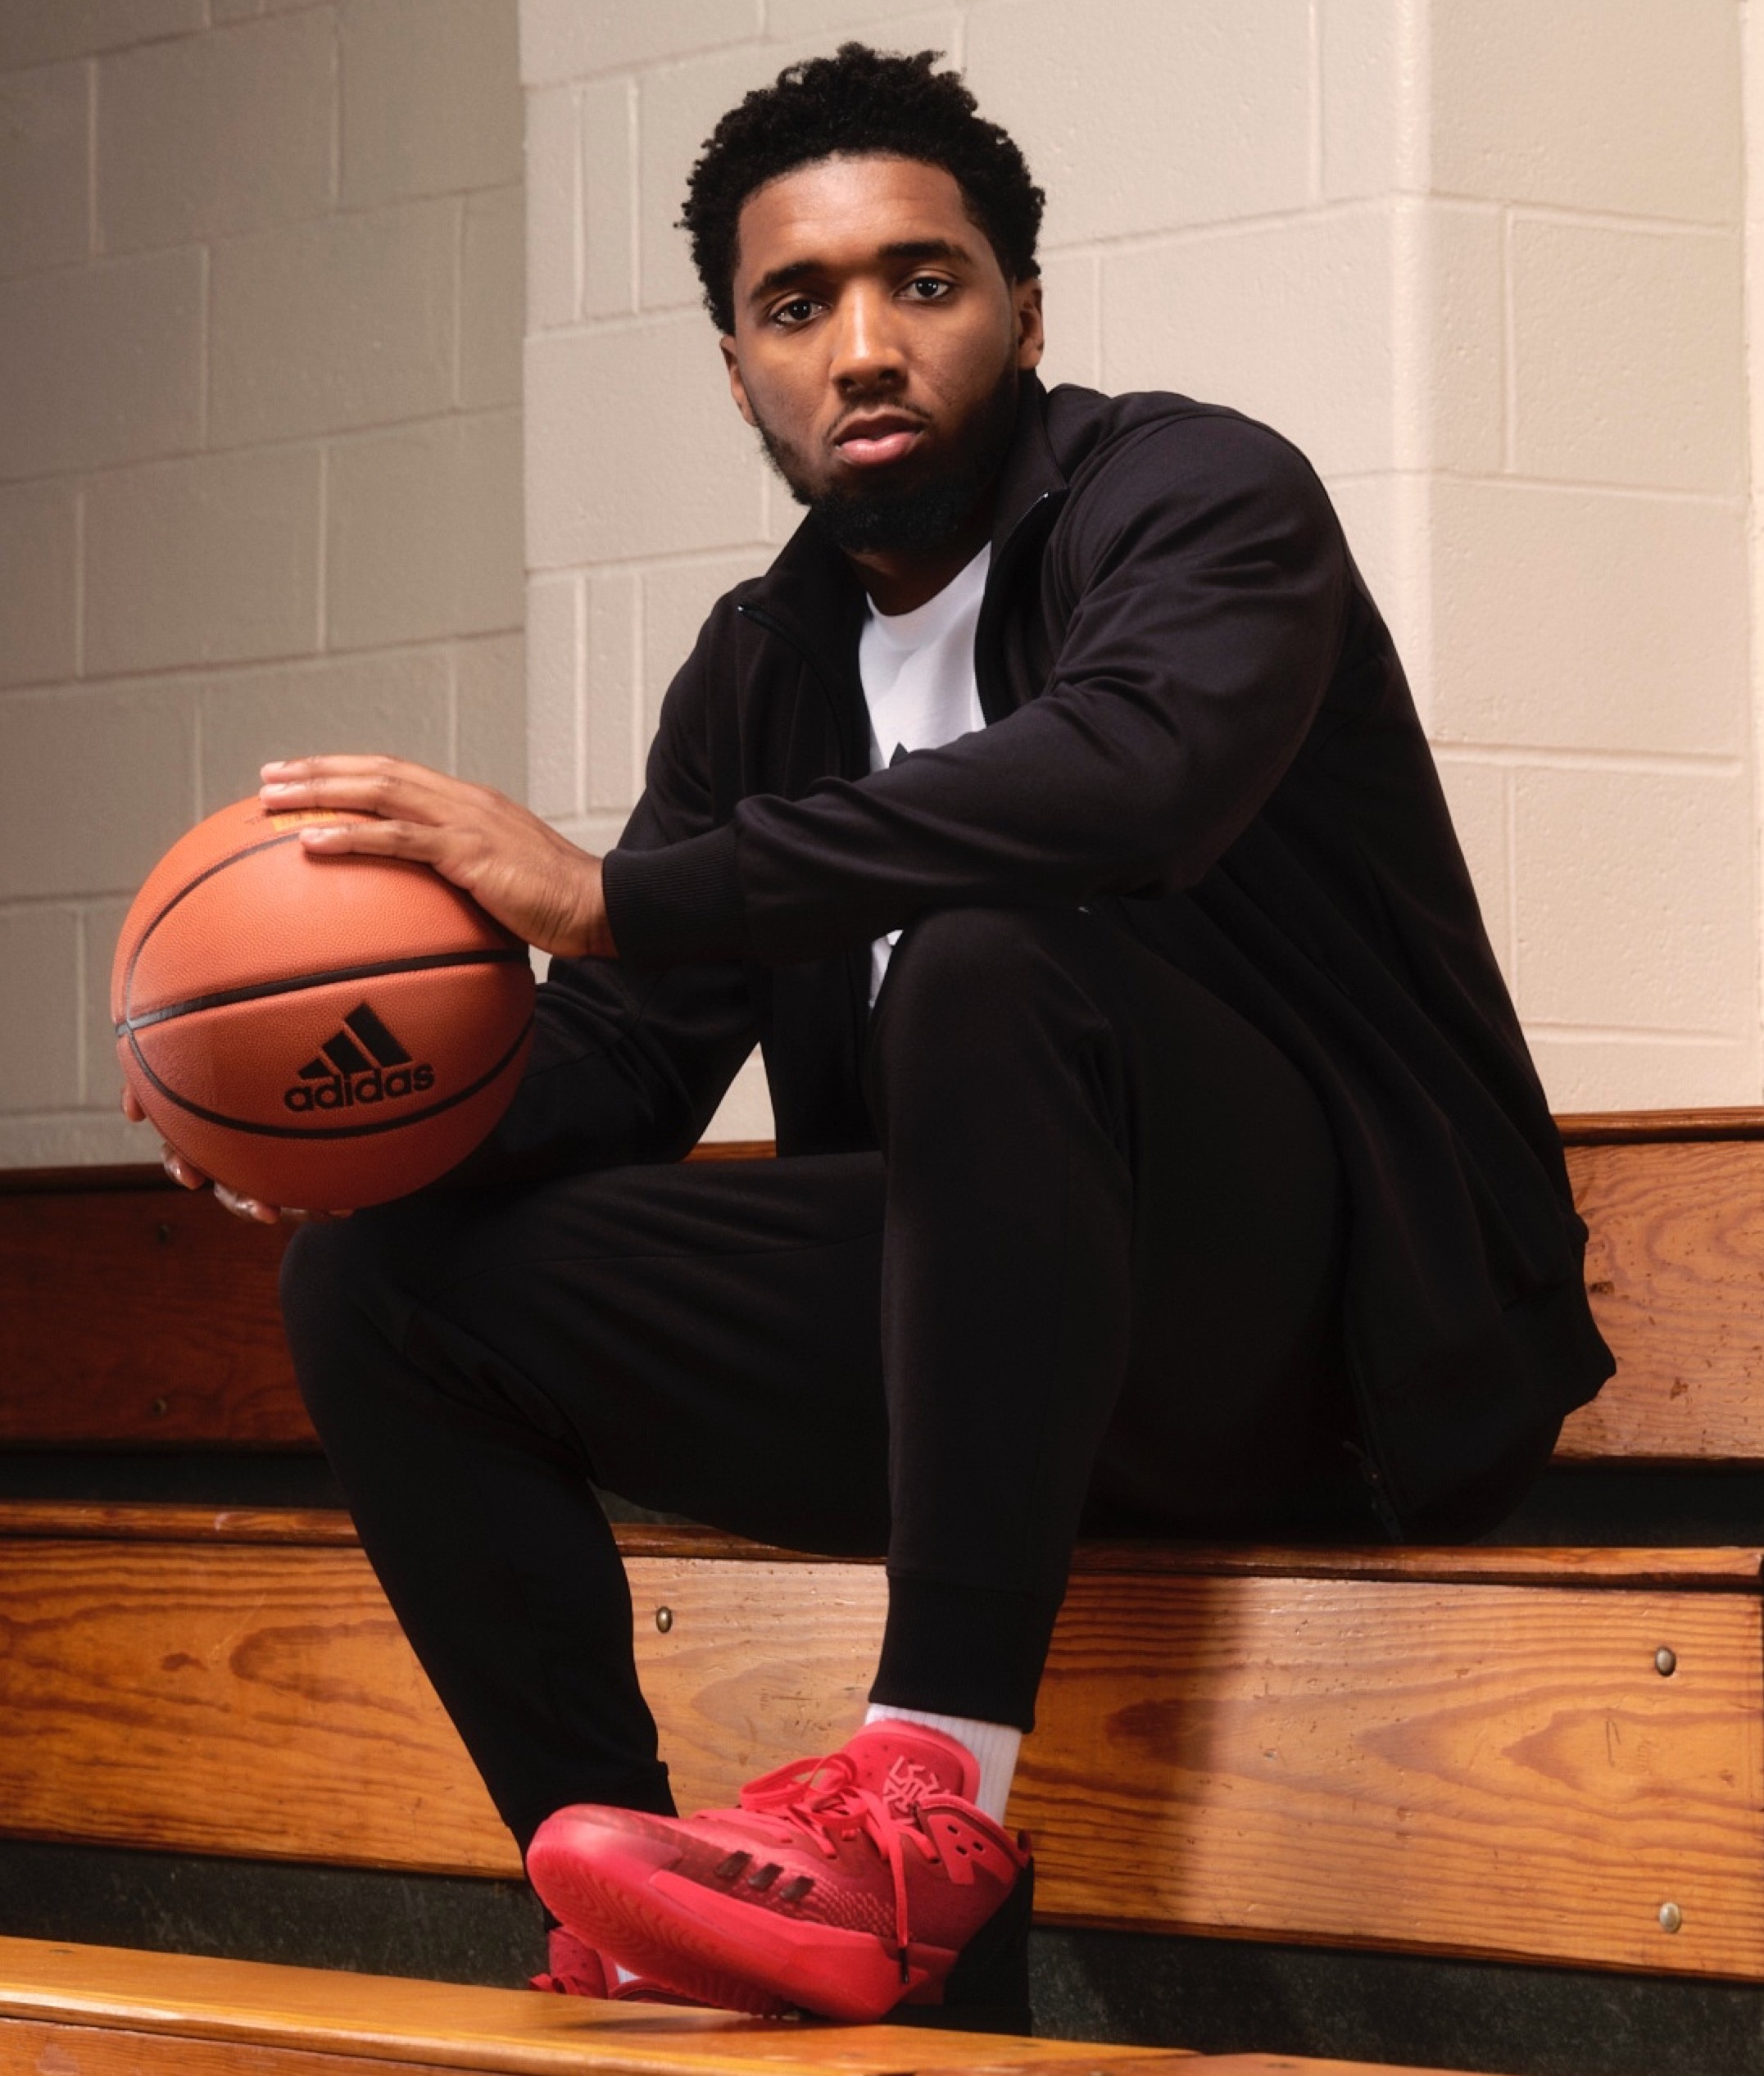 Donovan Mitchell D.O.N. Issue Basketball Shoes